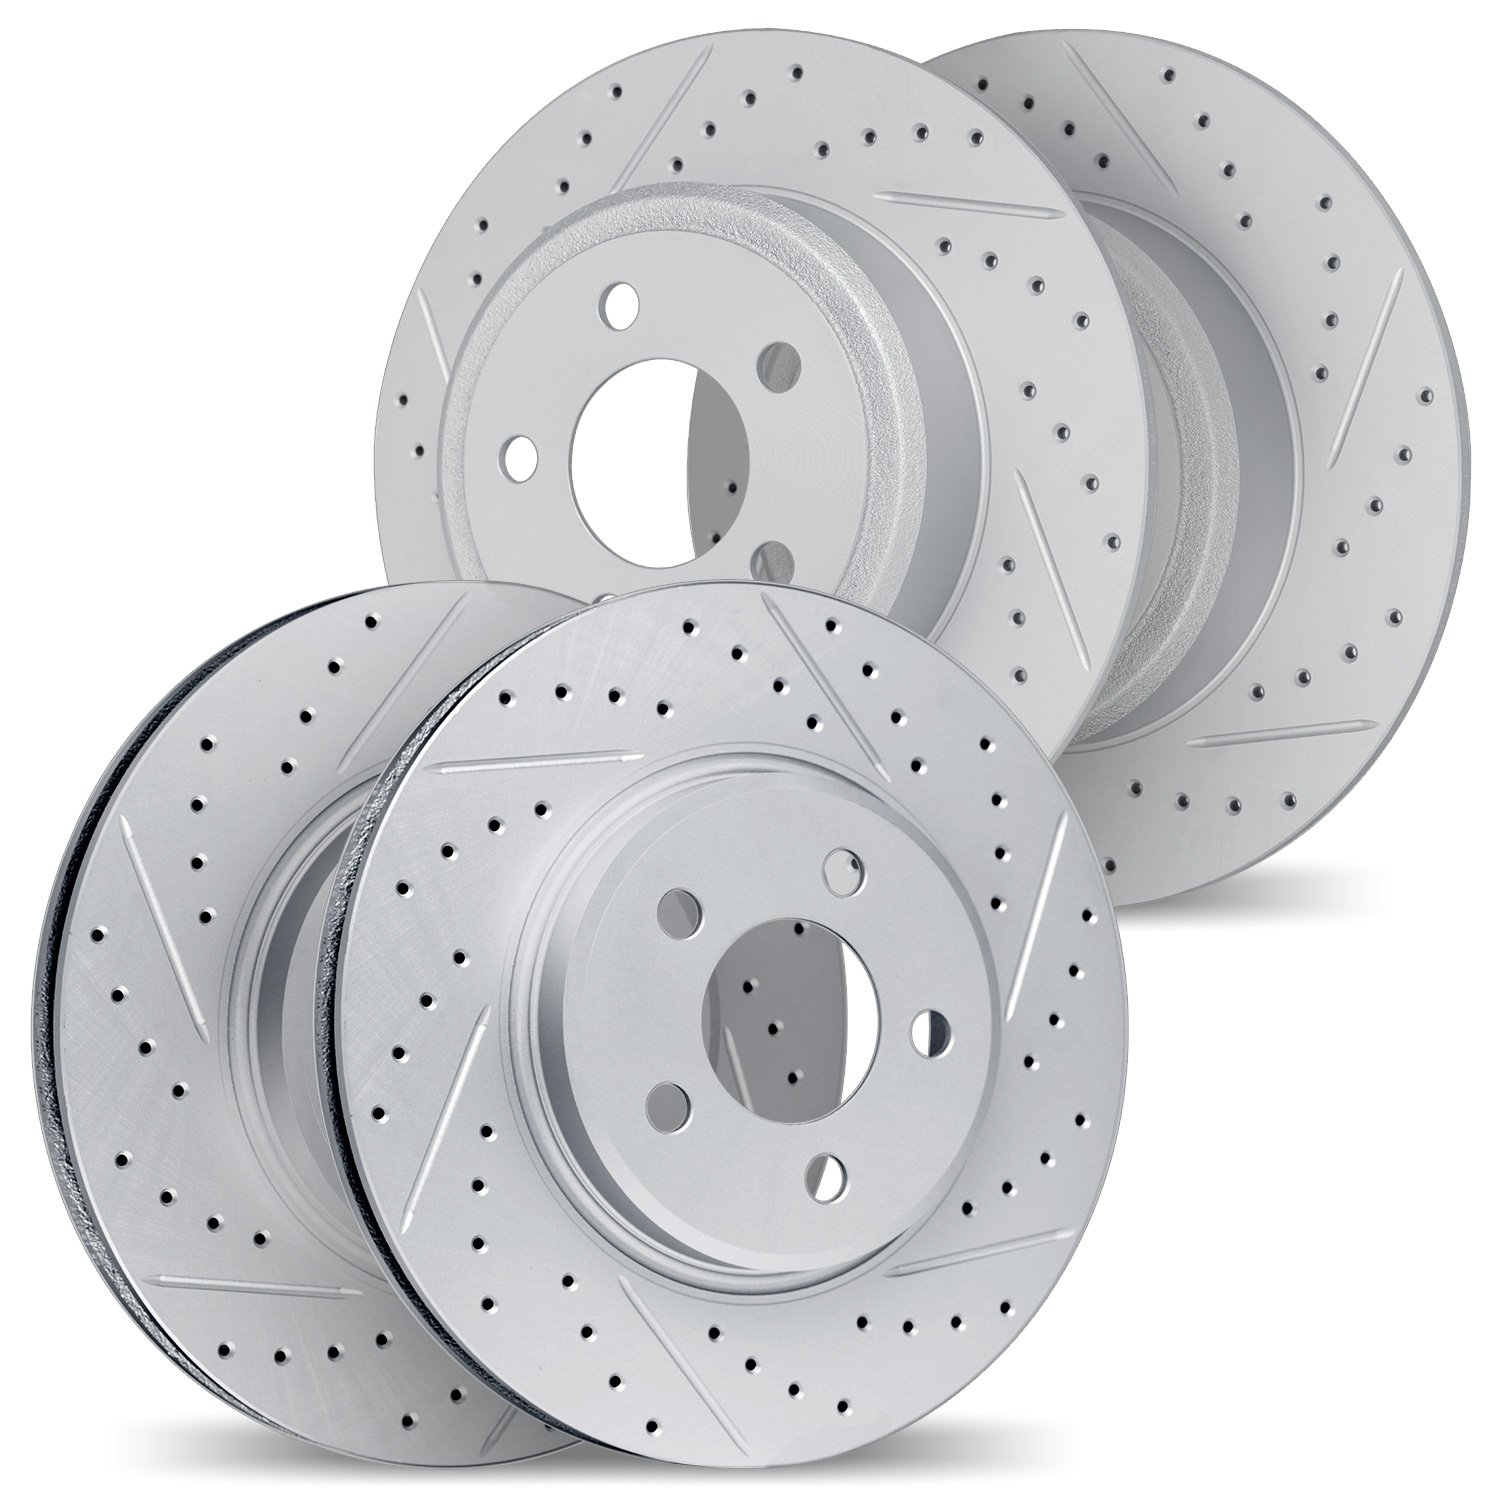 2004-76048 Geoperformance Drilled/Slotted Brake Rotors, 2008-2013 Lexus/Toyota/Scion, Position: Front and Rear